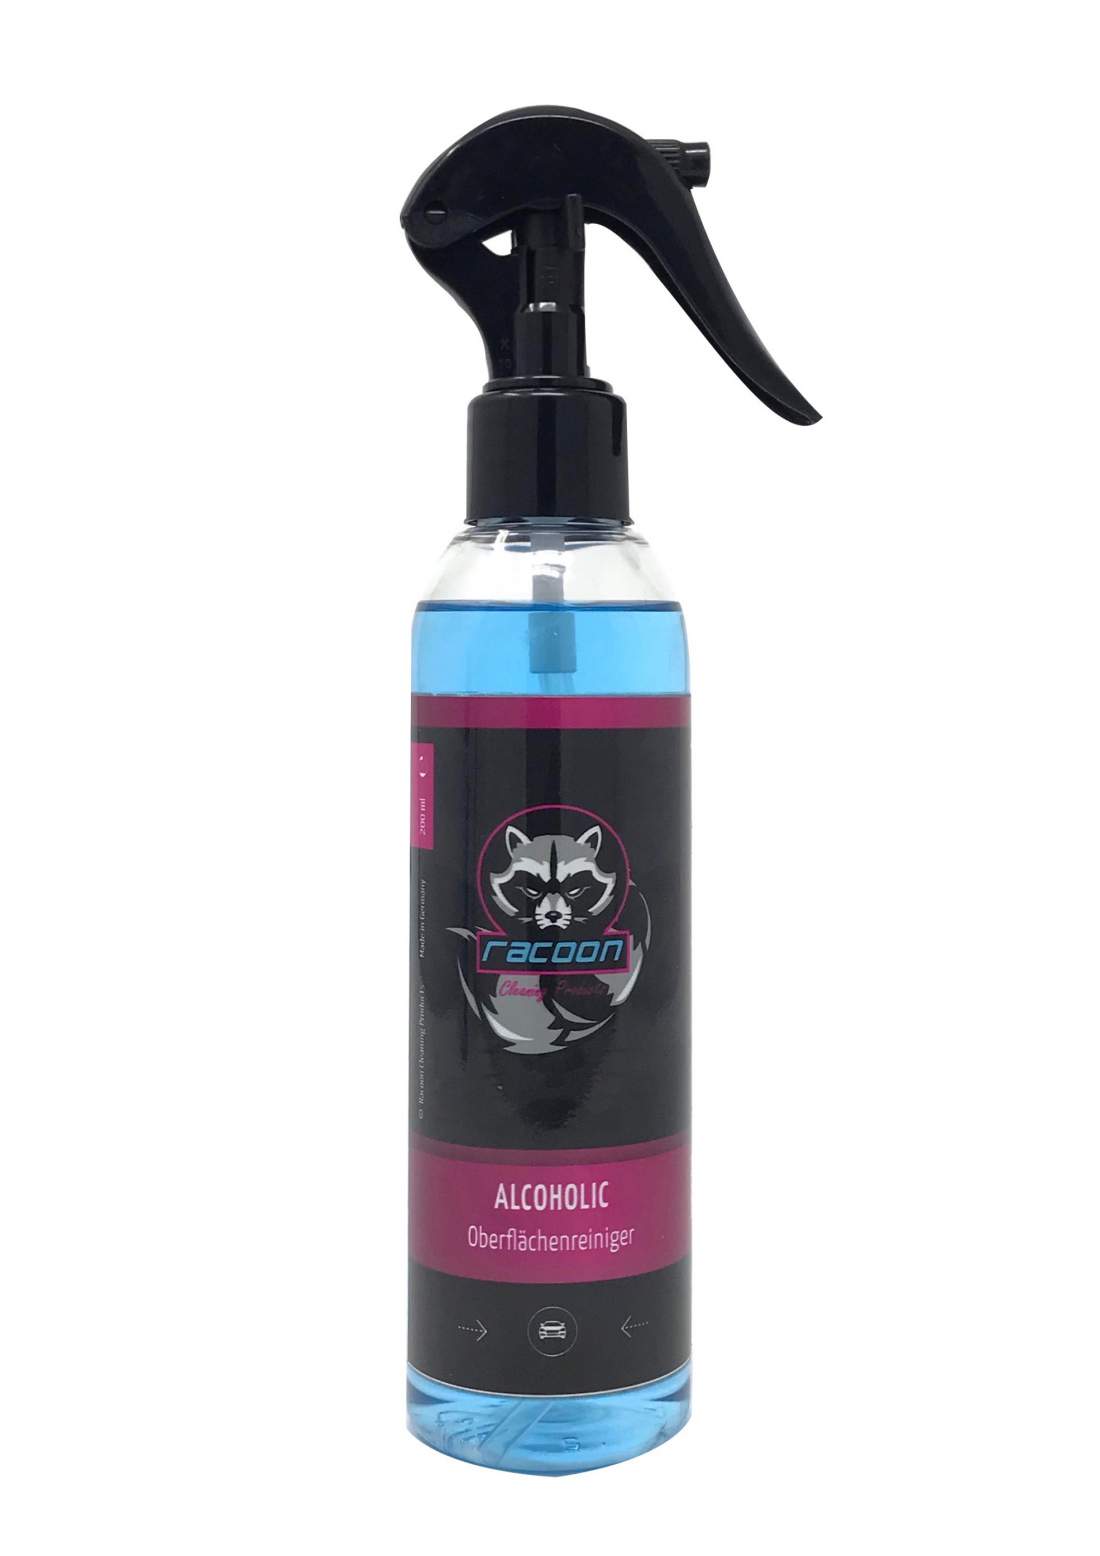 Racoon Alcoholic surface cleaner 100ml  